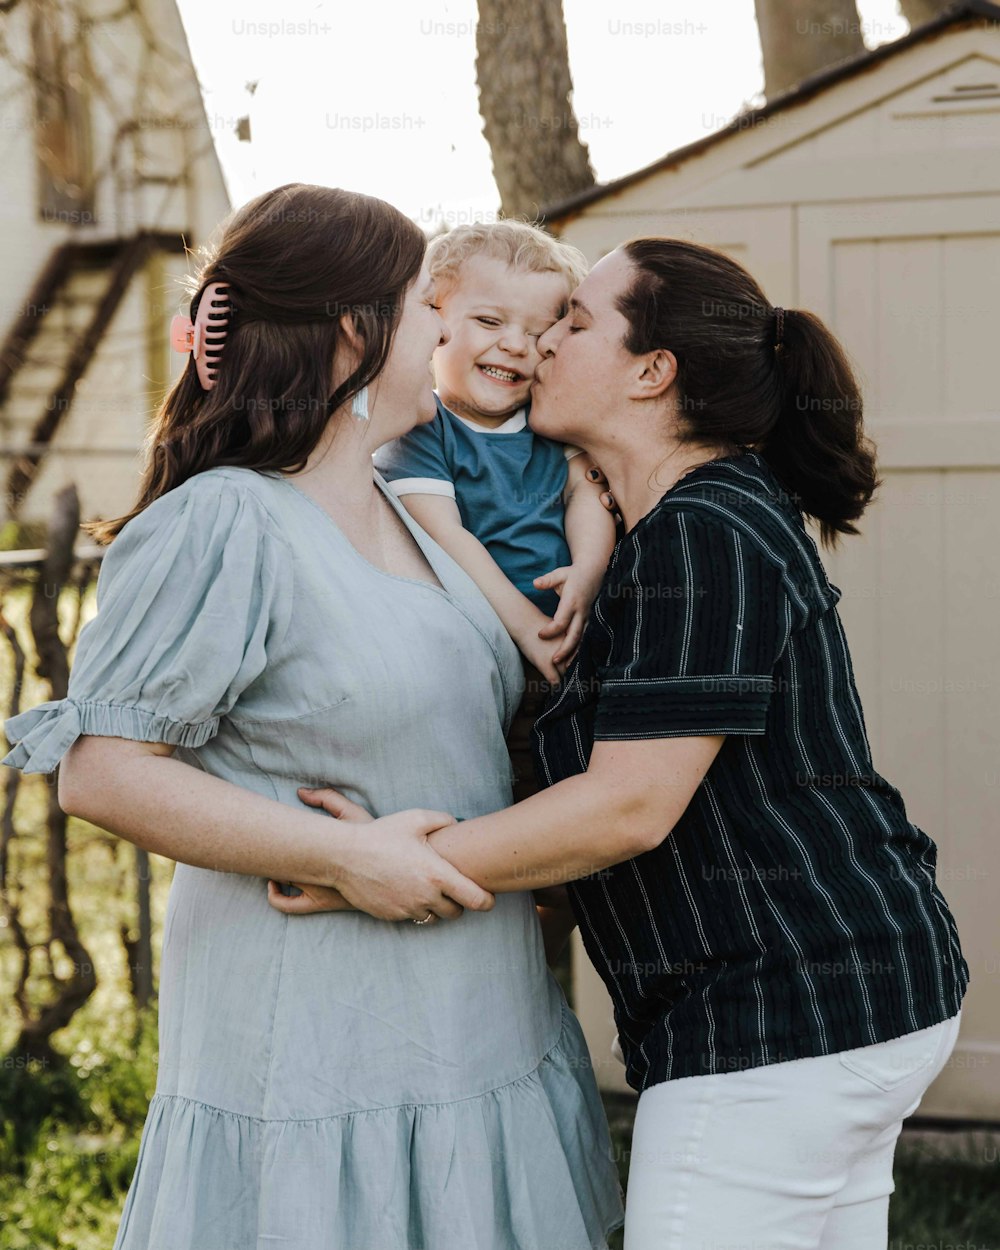 a woman holding a baby and kissing another woman